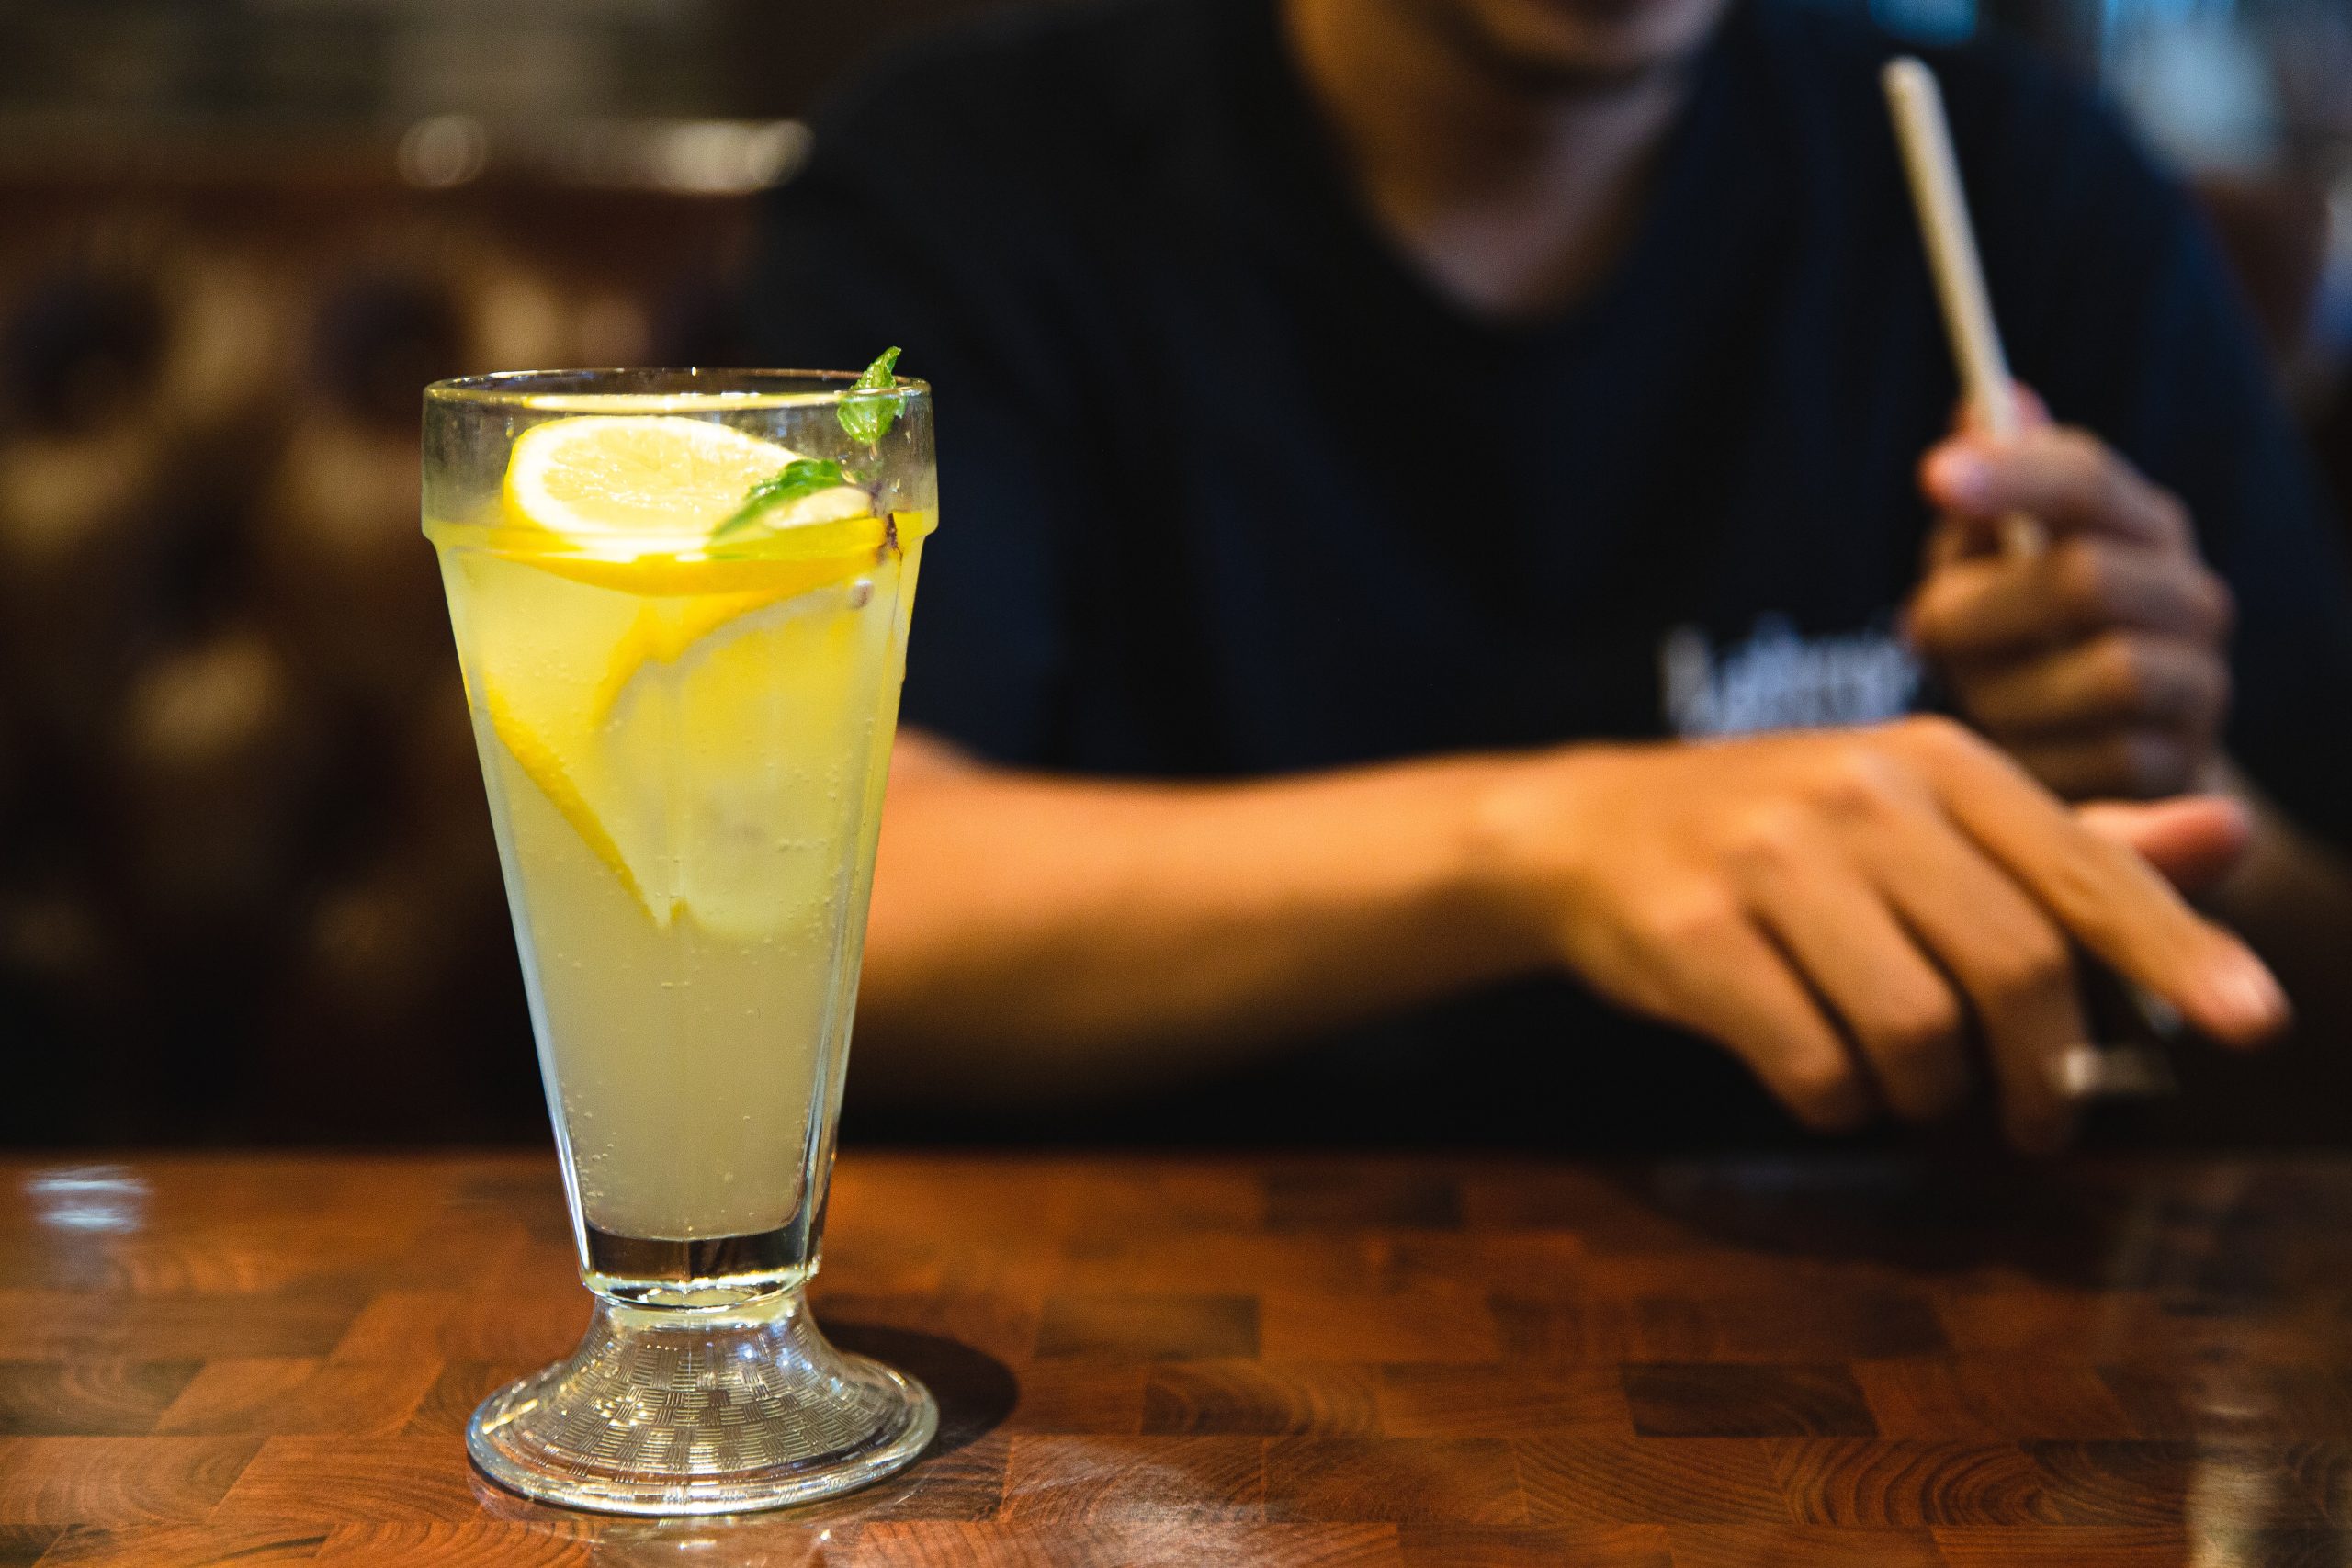 The Mocktail Dilemma: Can Alcohol-Free Drinks Really Help Control Alcohol Intake?